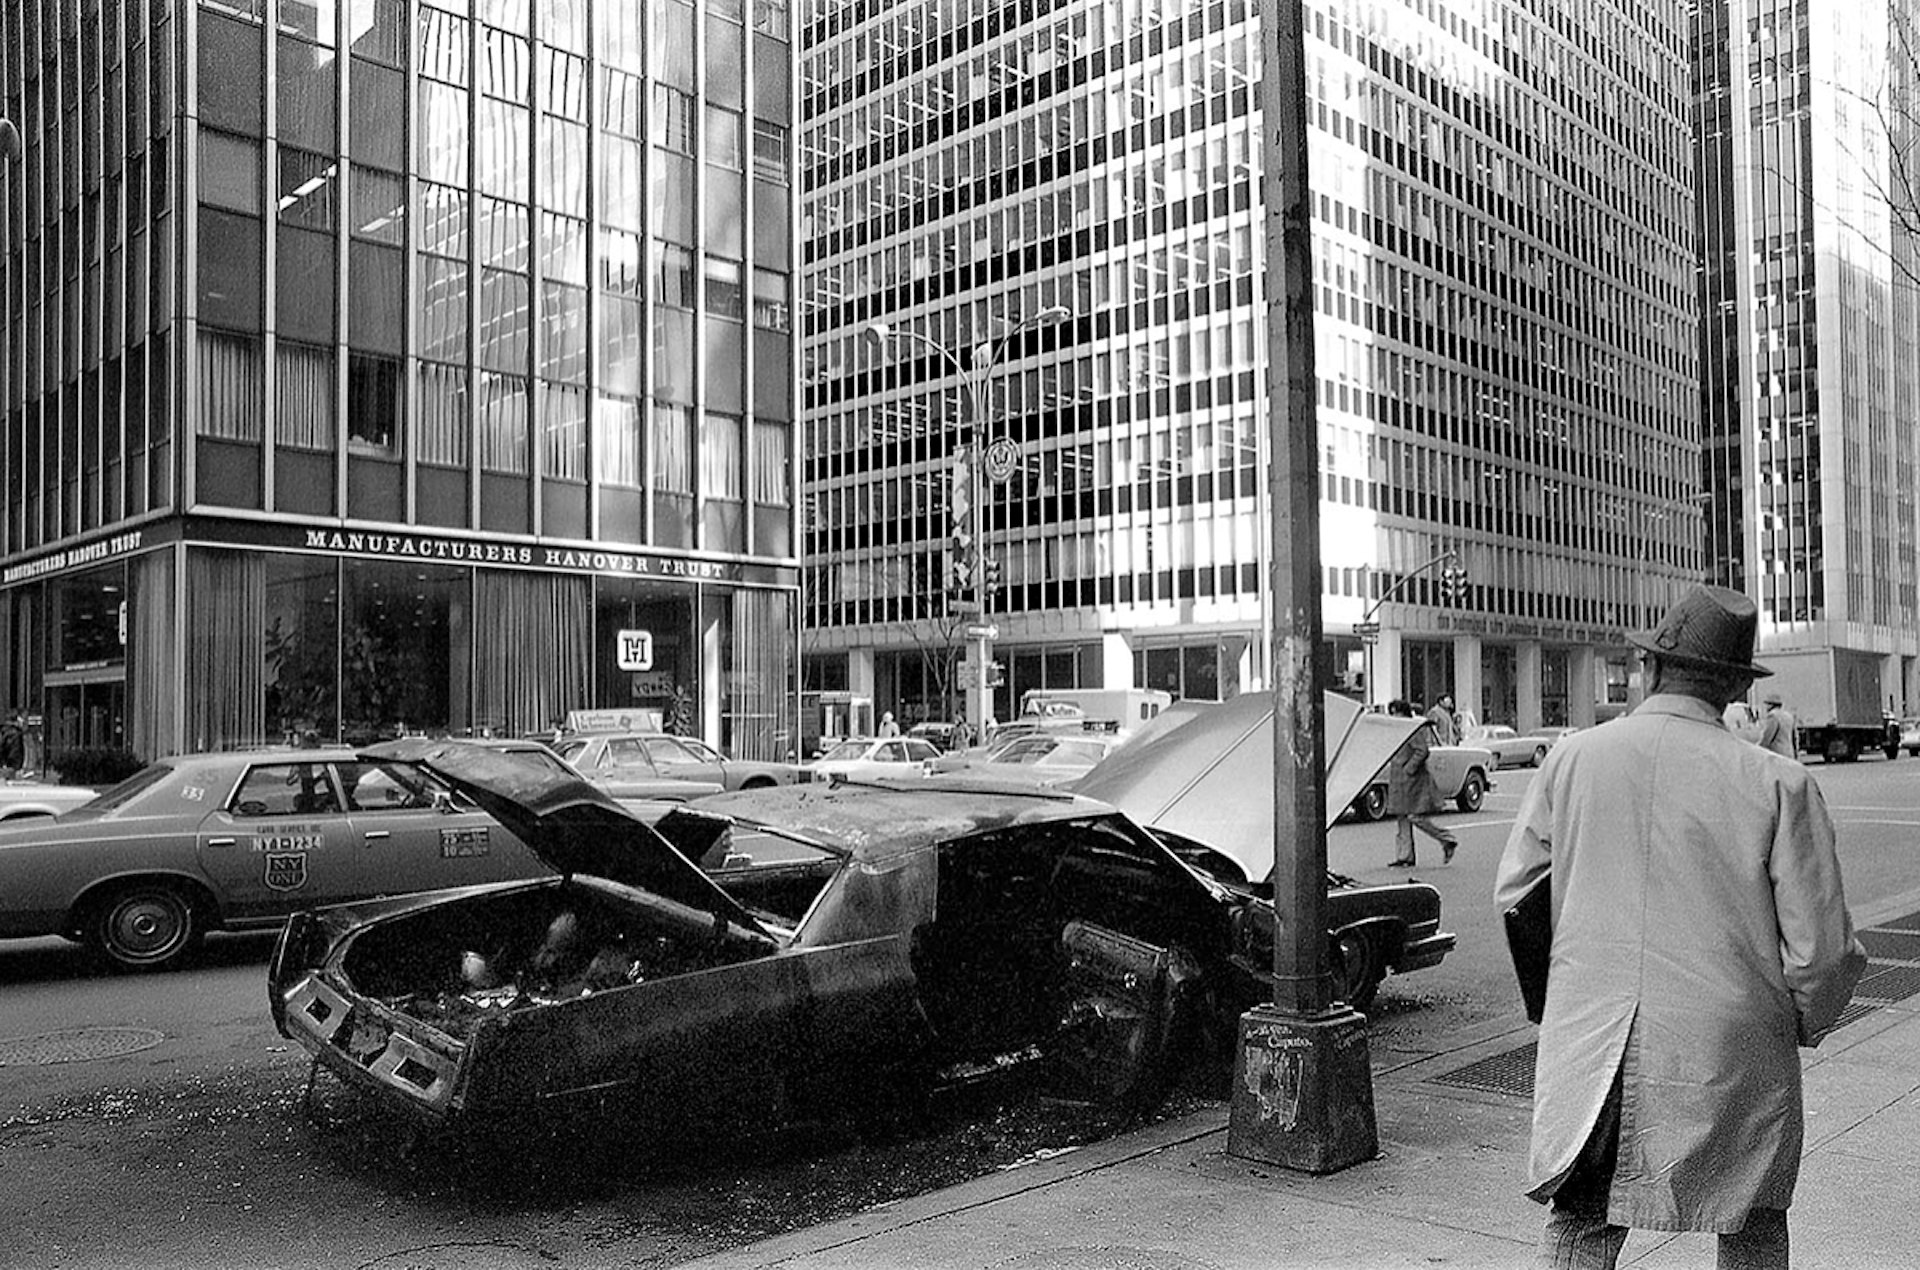 Burnt out Car on NYC Street, 1970’s